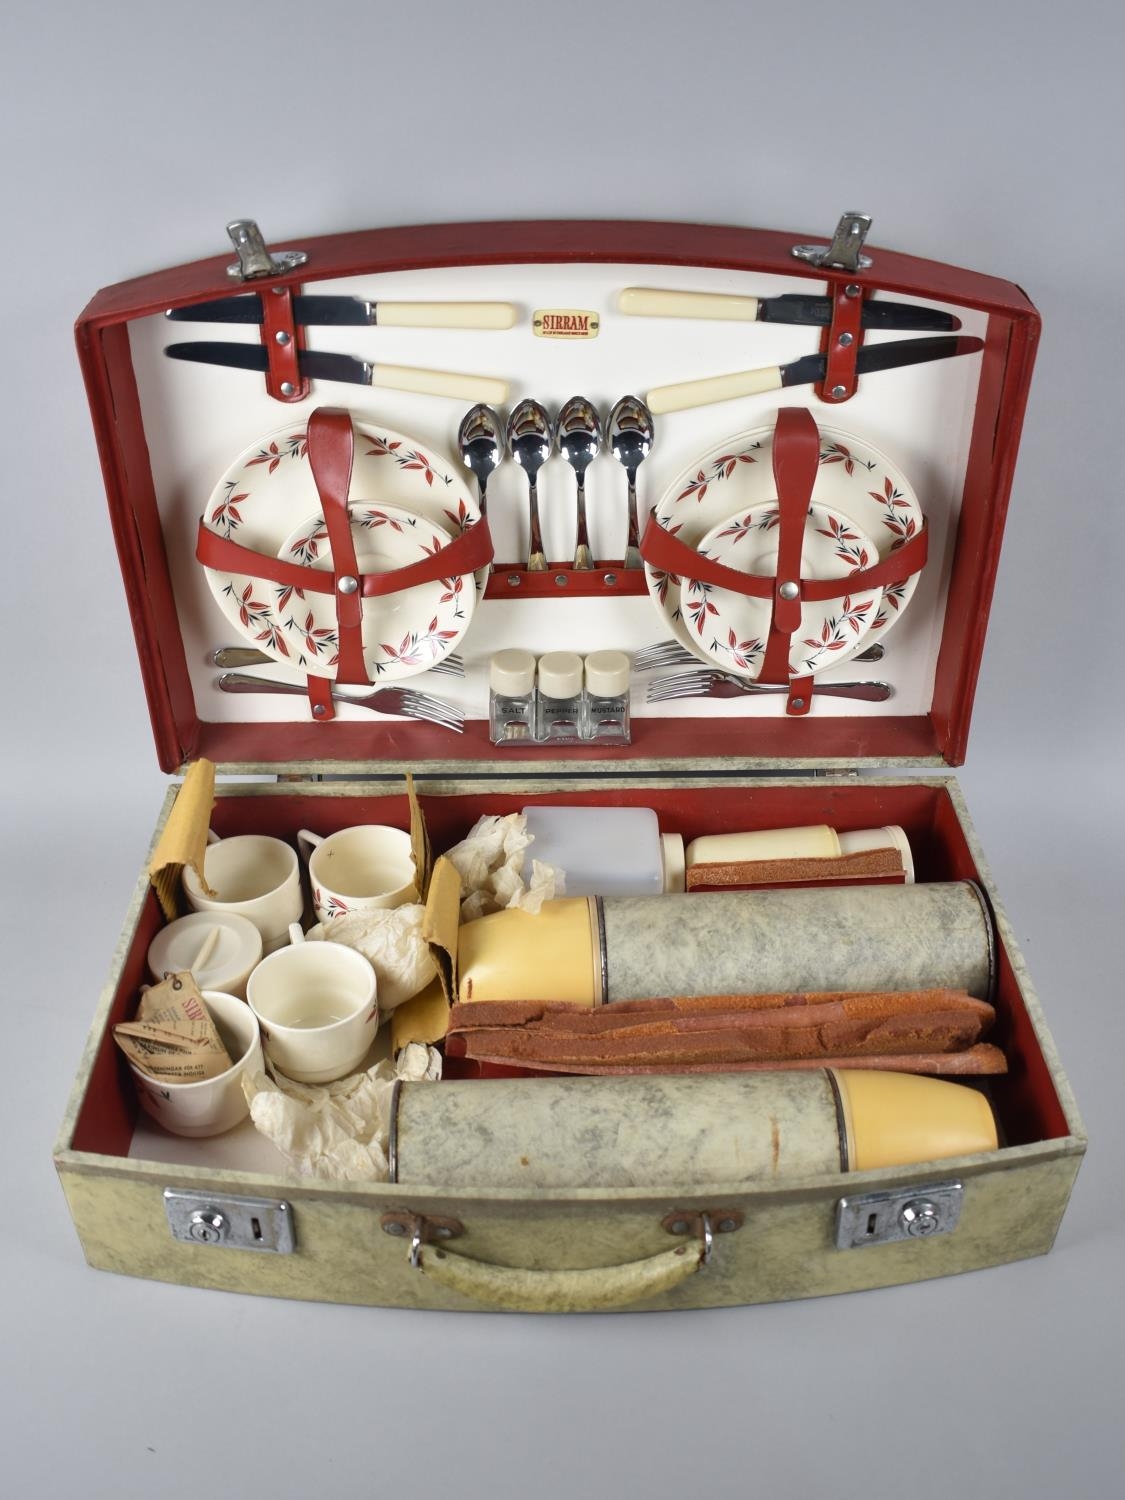 A Vintage Sirram Picnic Box with Contents - Image 2 of 2